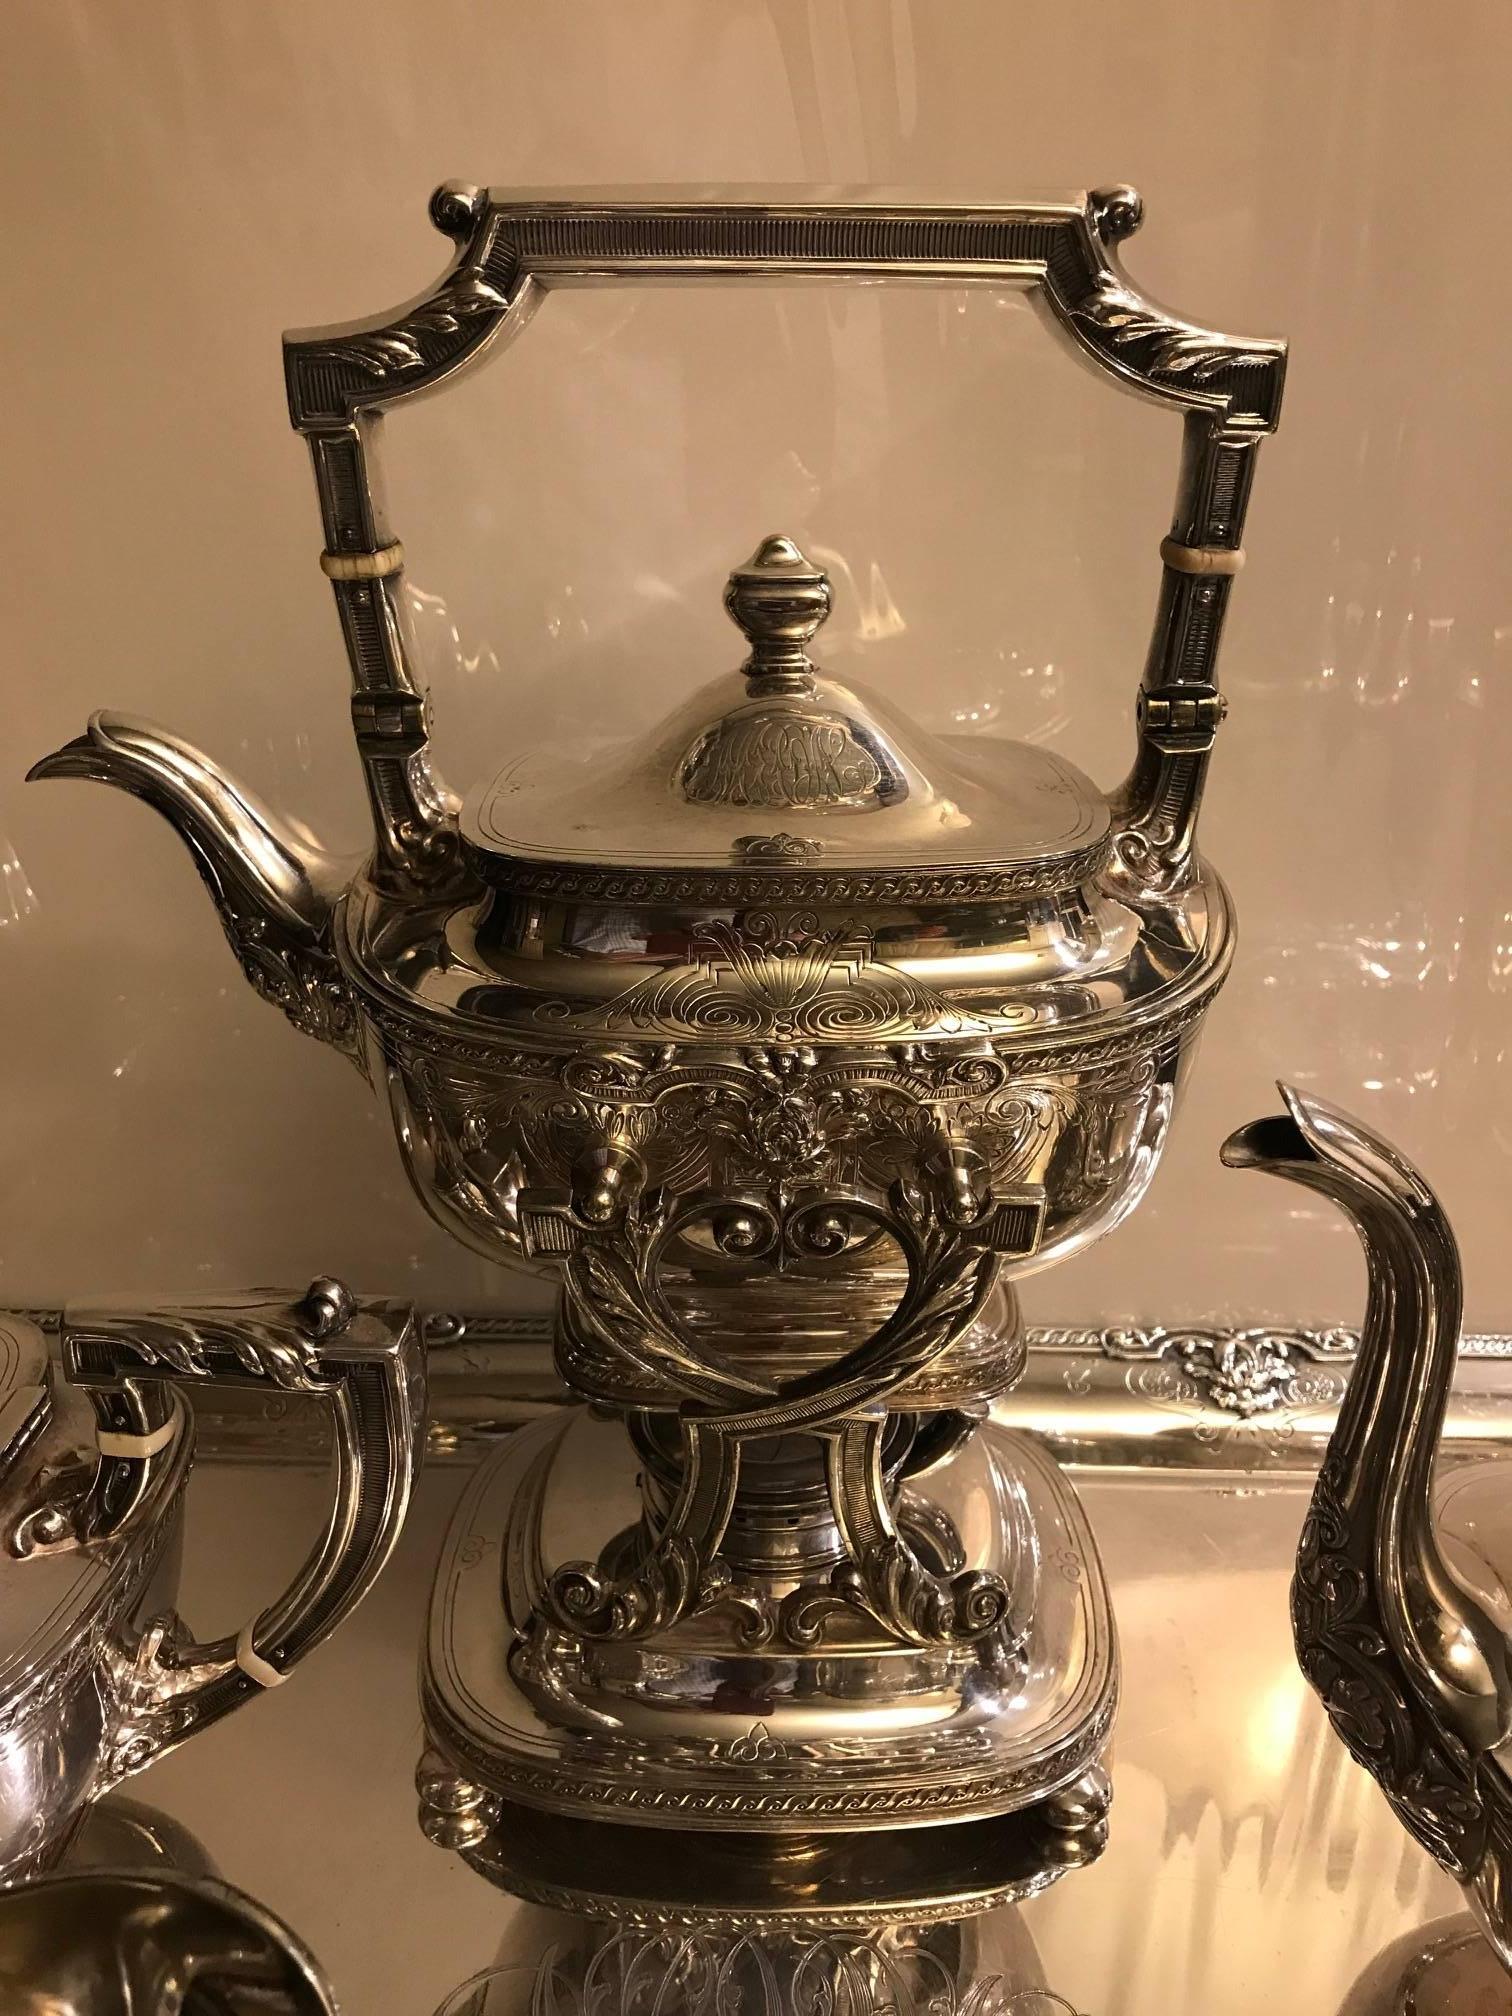 Exceptional hand chased tea set by Gorham, year mark 1925. Set includes, all in gleaming heavy silver plate, large tray, large tilting kettle, coffee pot, tea pot, covered sugar, creamer This elegant set is very complete and all original with